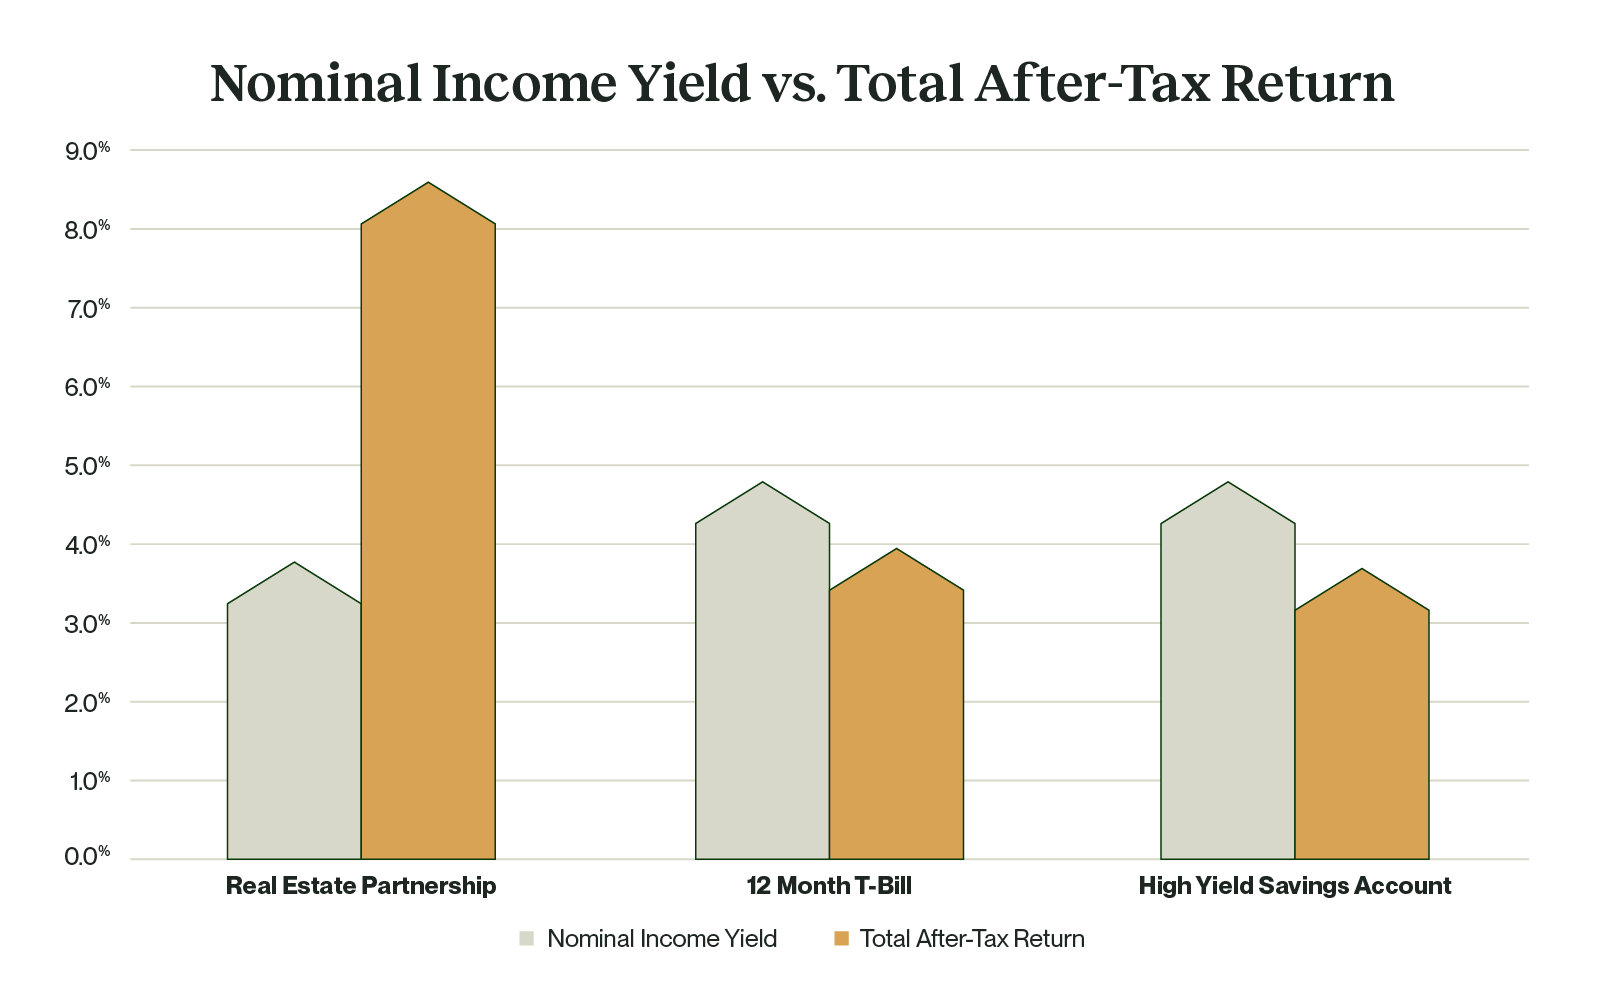 Nominal Income Yield vs. Total After-Tax Return bar graph comparing Real Estate Partnership, 12 Month T-Bill, and High Yield Savings Account